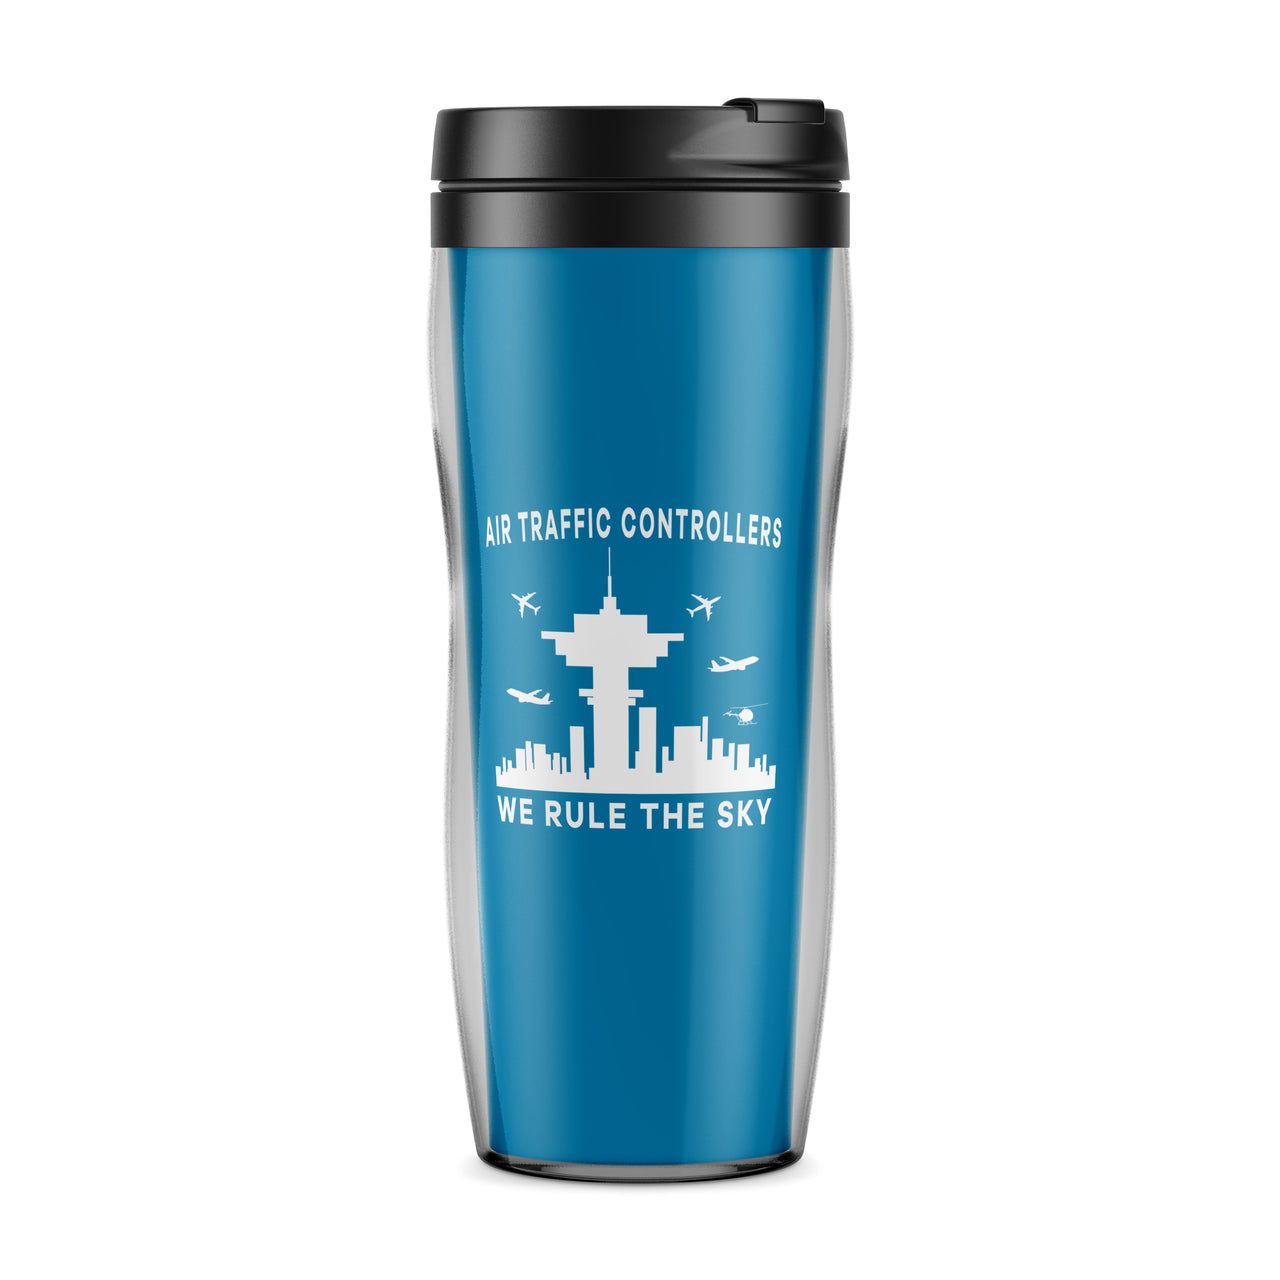 Air Traffic Controllers - We Rule The Sky Designed Plastic Travel Mugs